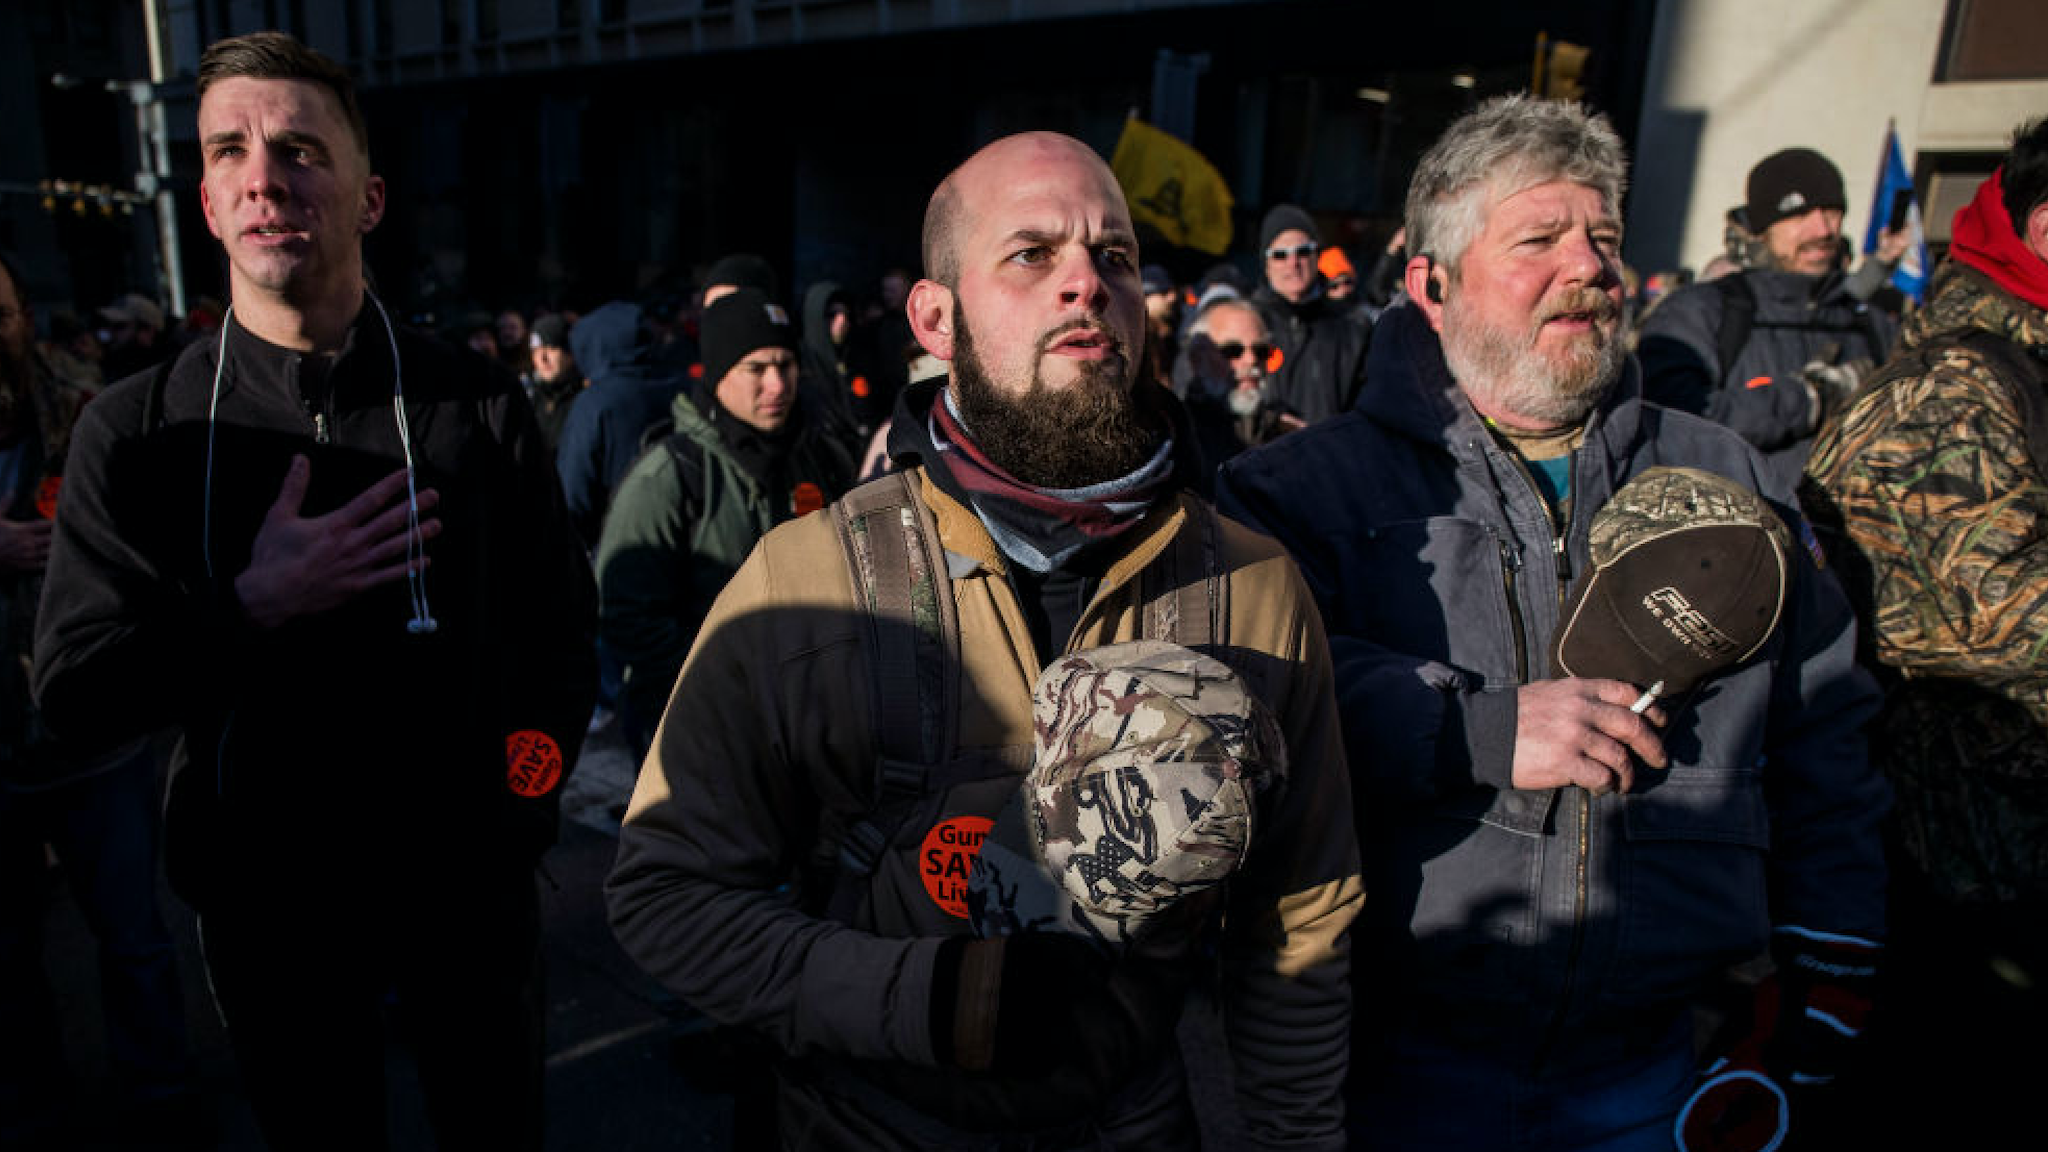 Gun rights advocates attend a rally organized by The Virginia Citizens Defense League on Capitol Square near the state capitol building on January 20, 2020 in Richmond, Virginia.